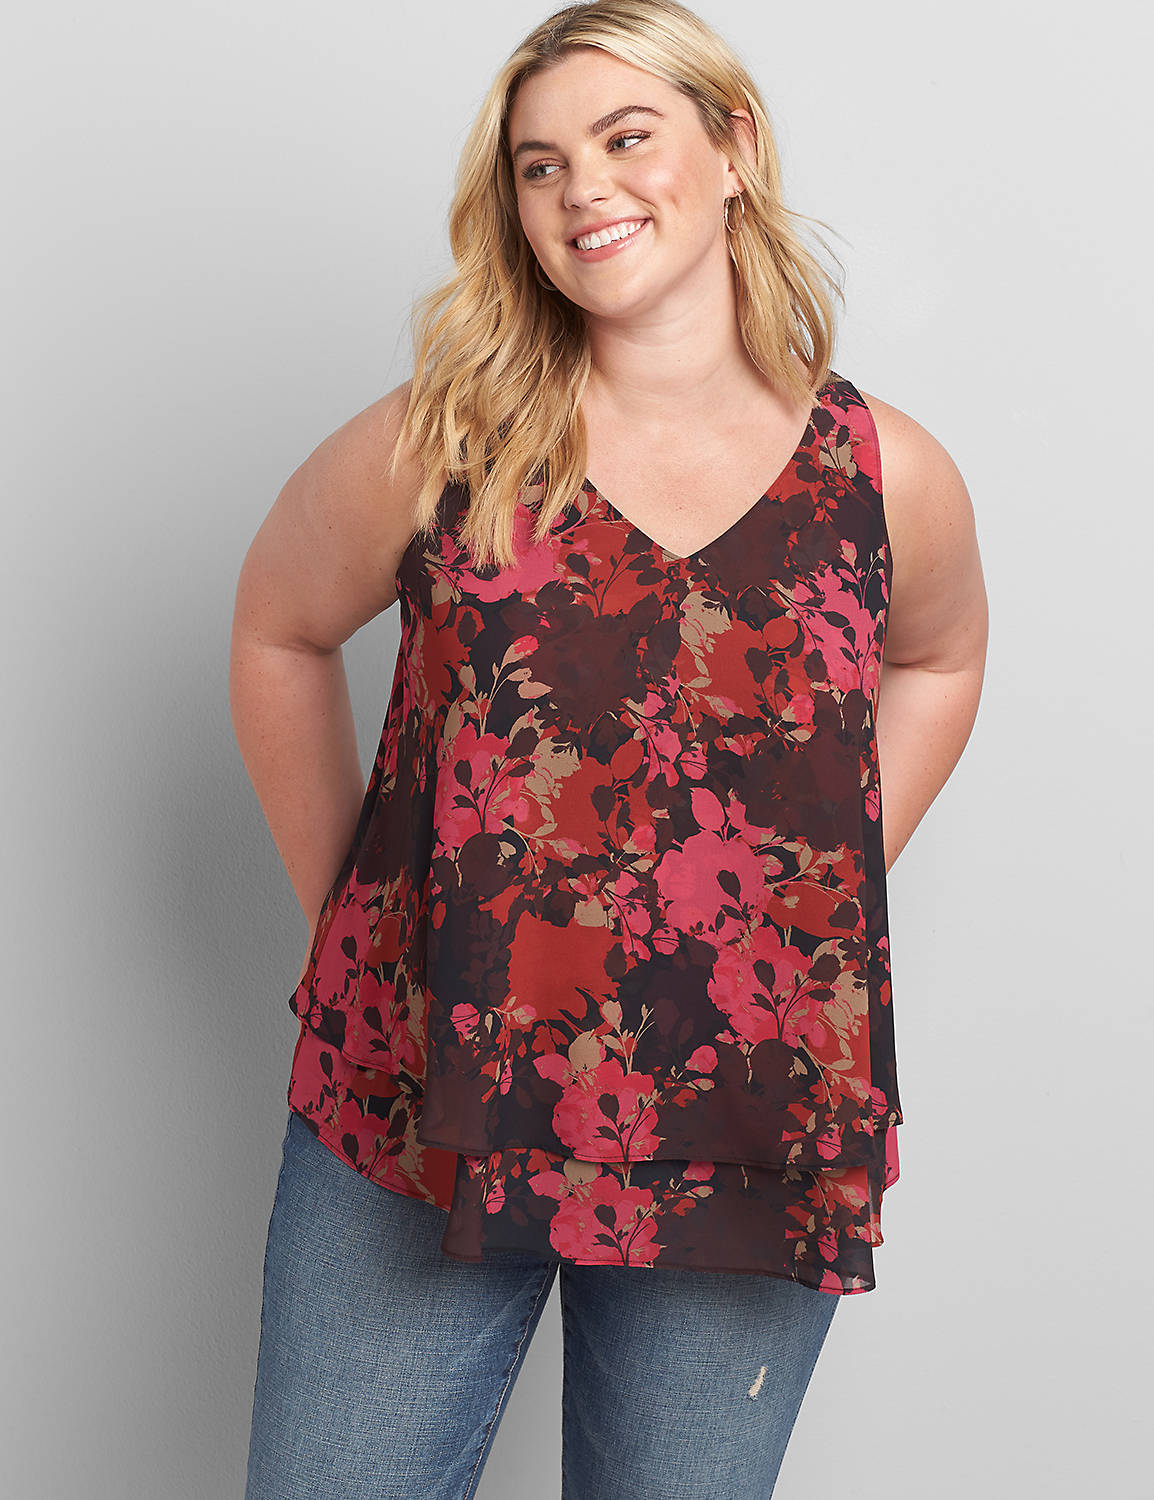 Outlet Sleeveless VNeck Double Layer Swing Tank -1114294:LBH20221_DrybrushedSilhouetteRoses_colorway1:12 Product Image 1